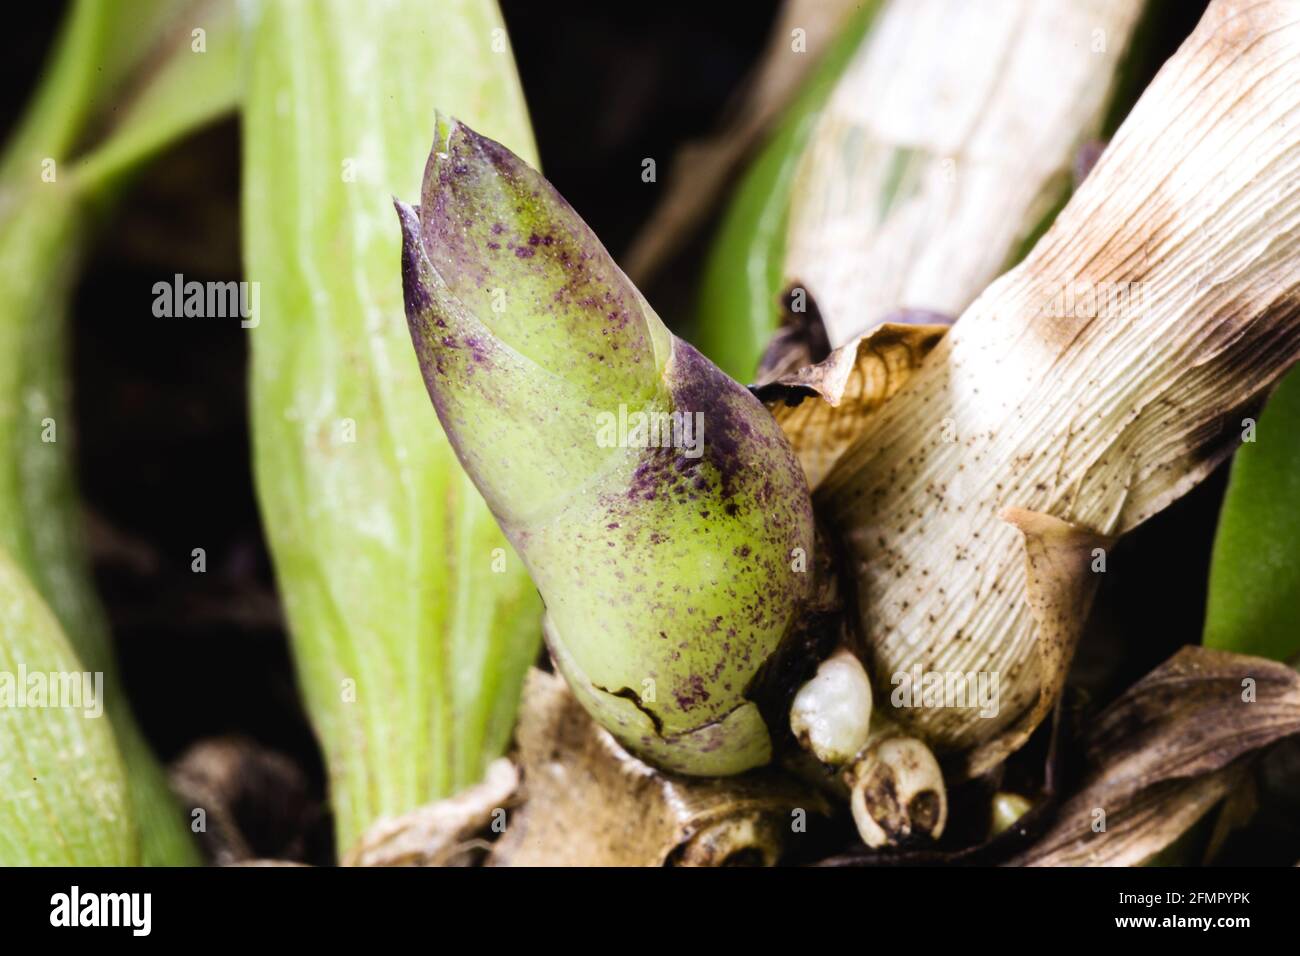 healthy bud of orchid growing in greenhouse. Anatomy of orchid, bract, leaf axils and visible pseudo bulbs Stock Photo